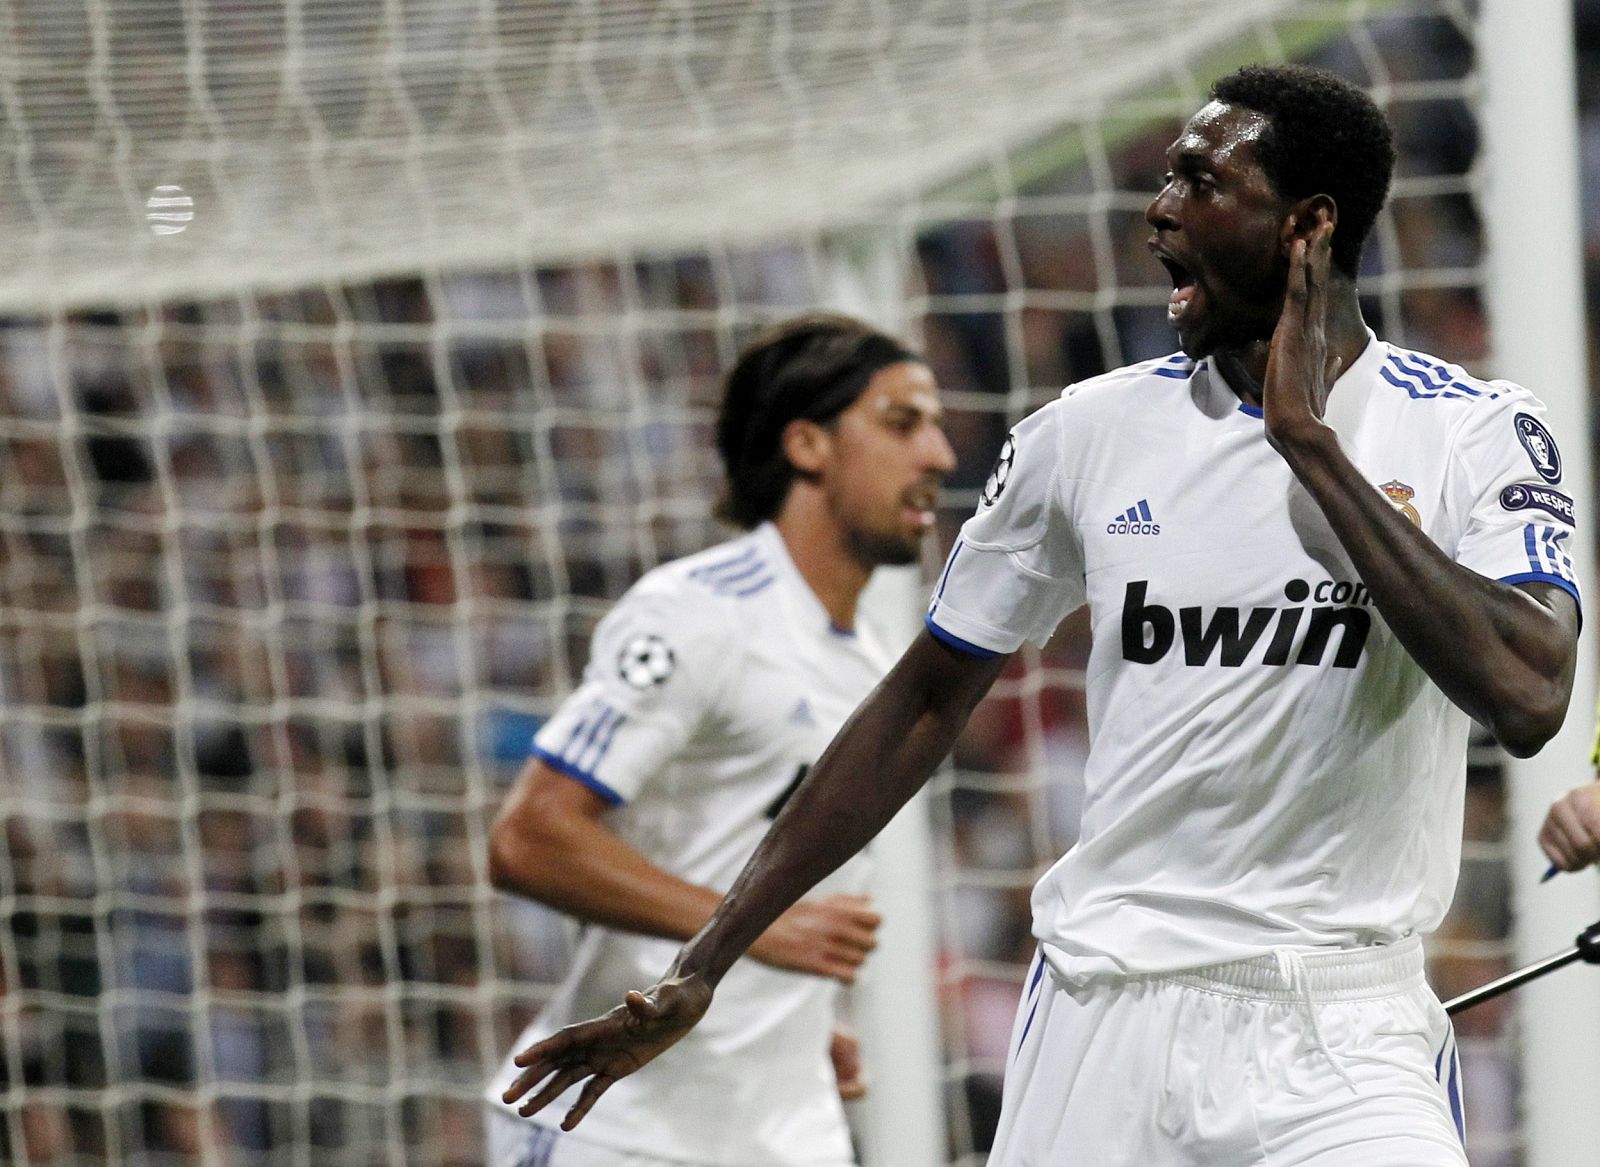 Real Madrid's Adebayor celebrates his second goal against Tottenham Hotspur during their first leg of their Champions League quarter-final soccer match against Tottenham Hotspur in Madrid